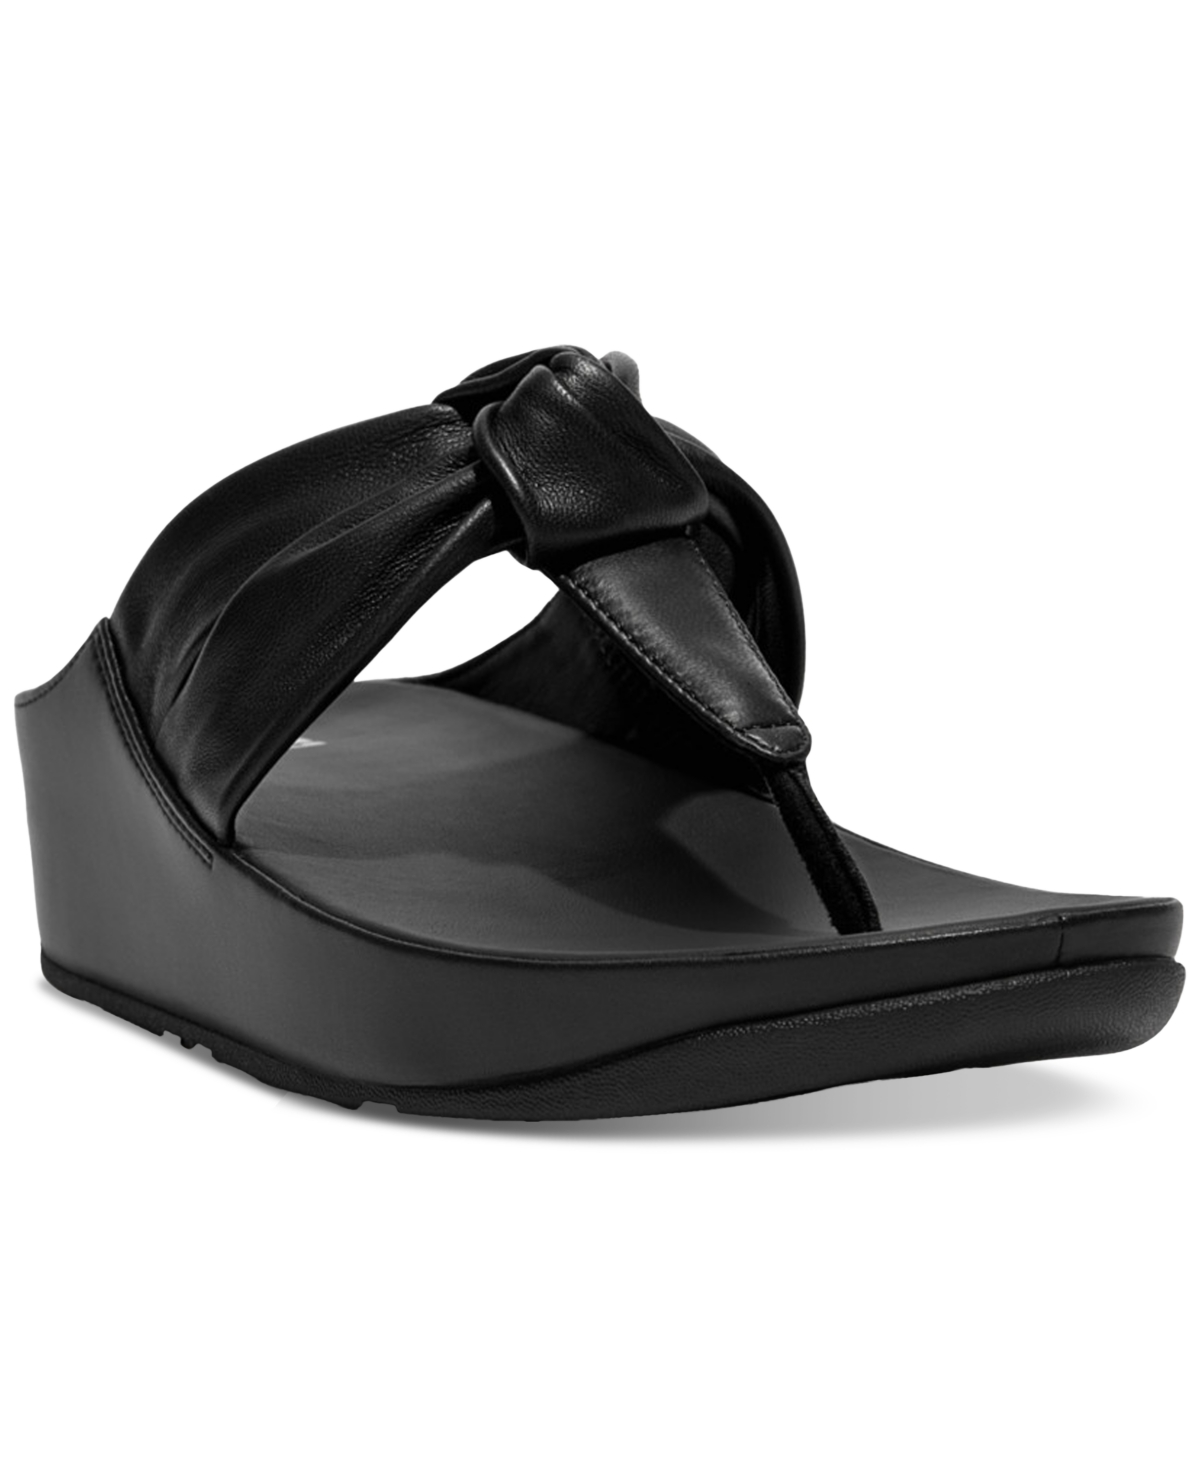 FitFlop Women's Twiss Ii Knotted T-Strap Thong Sandals Women's Shoes